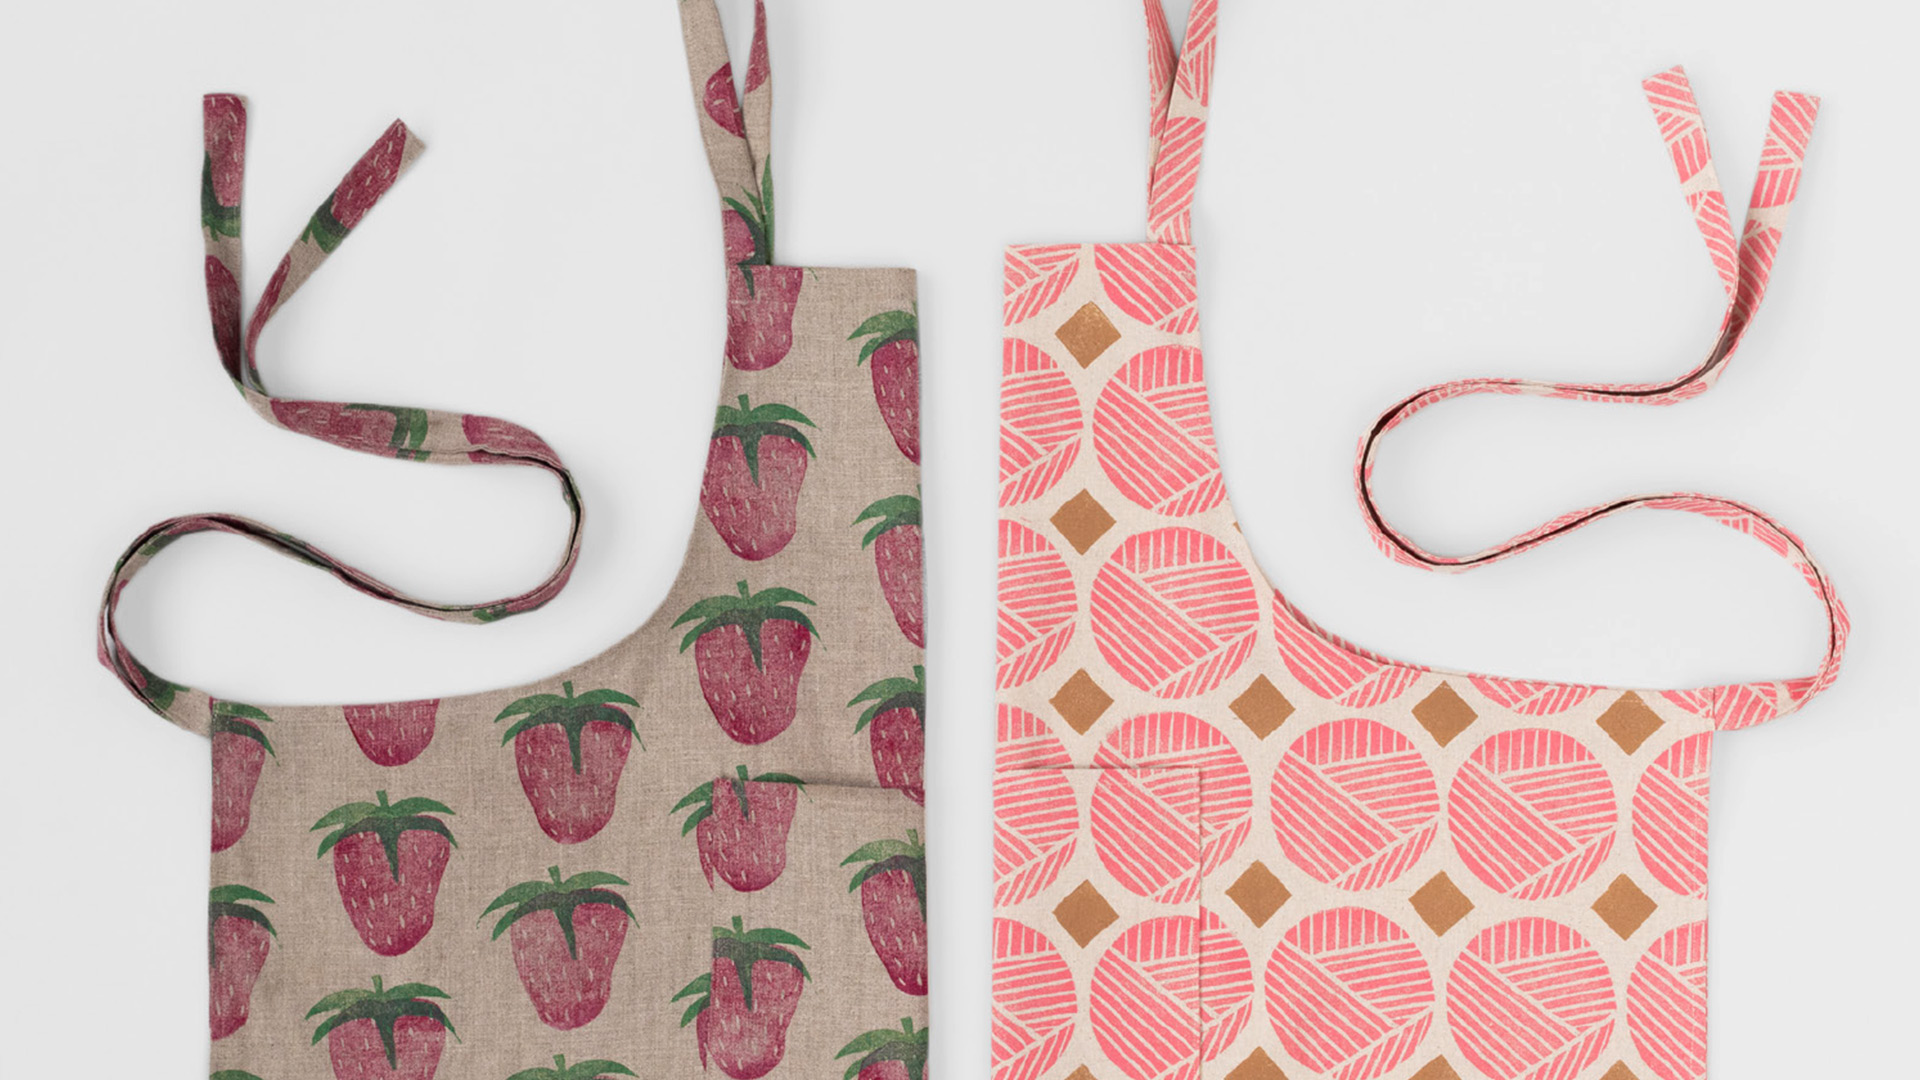 Modern Studio or Chef’s Apron | Jen Hewettarticle featured image thumbnail.